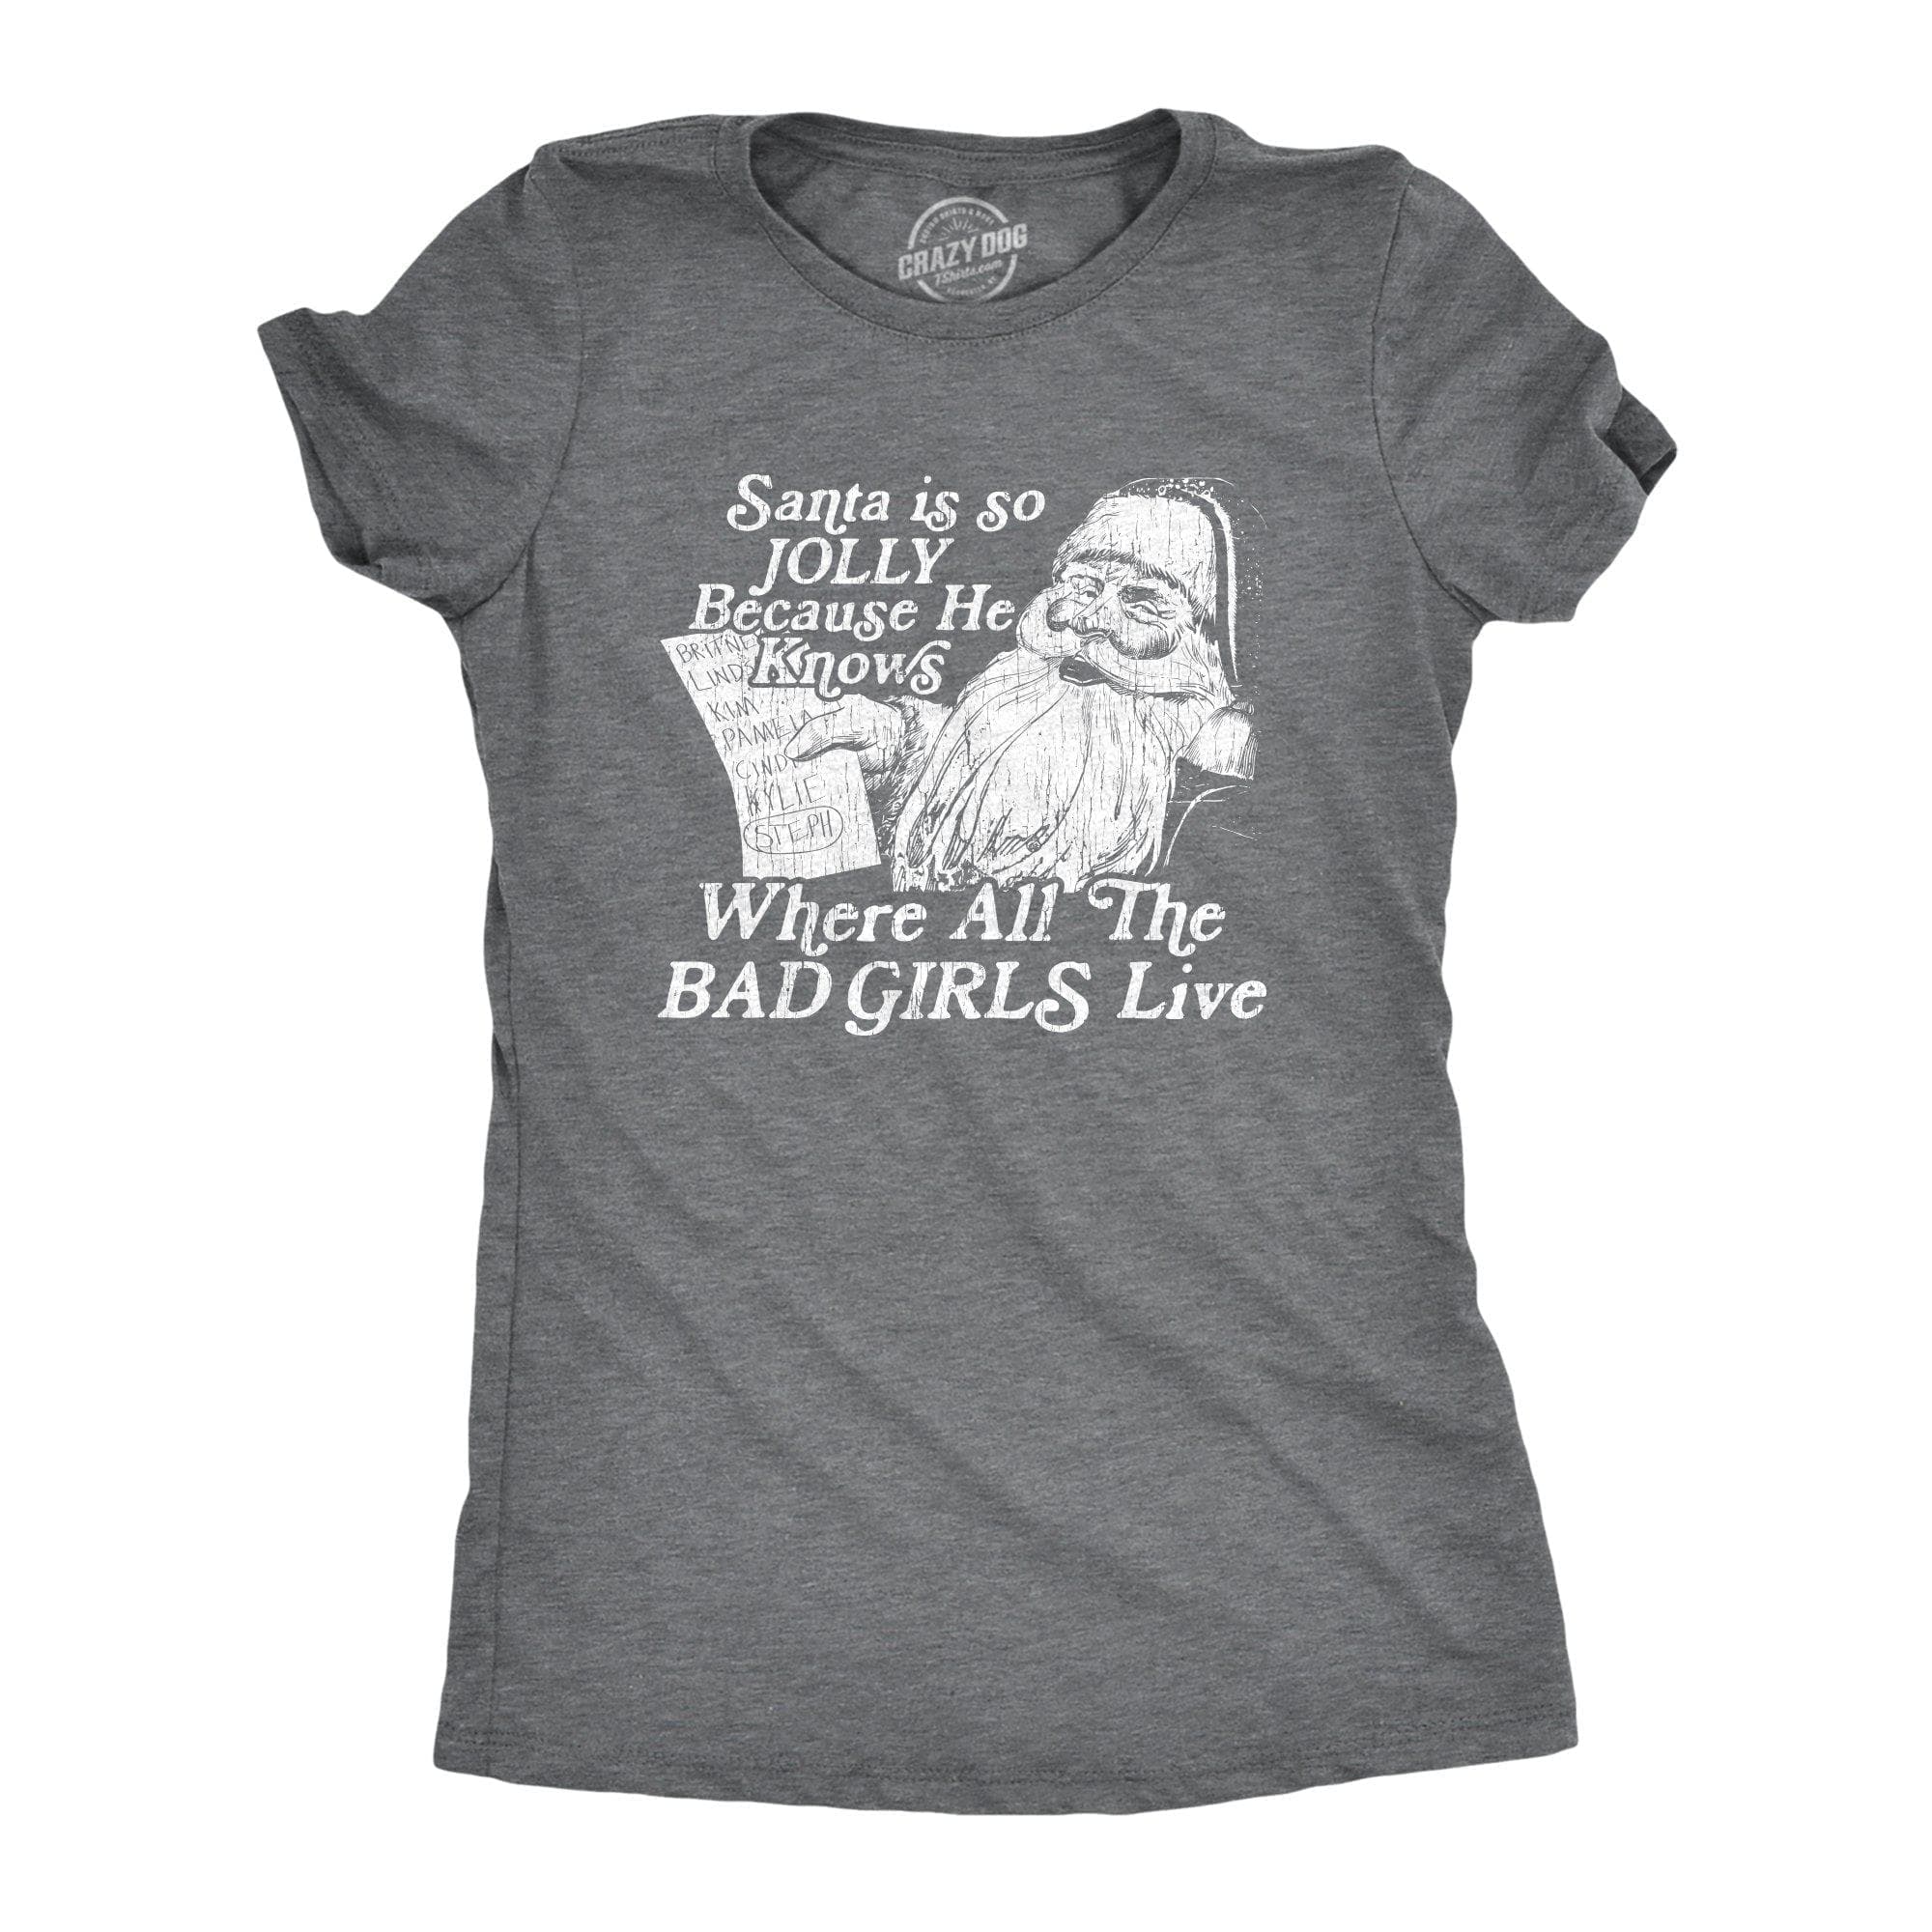 Santa Is Jolly Because He Knows Where The Bad Girls Live Women's Tshirt - Crazy Dog T-Shirts